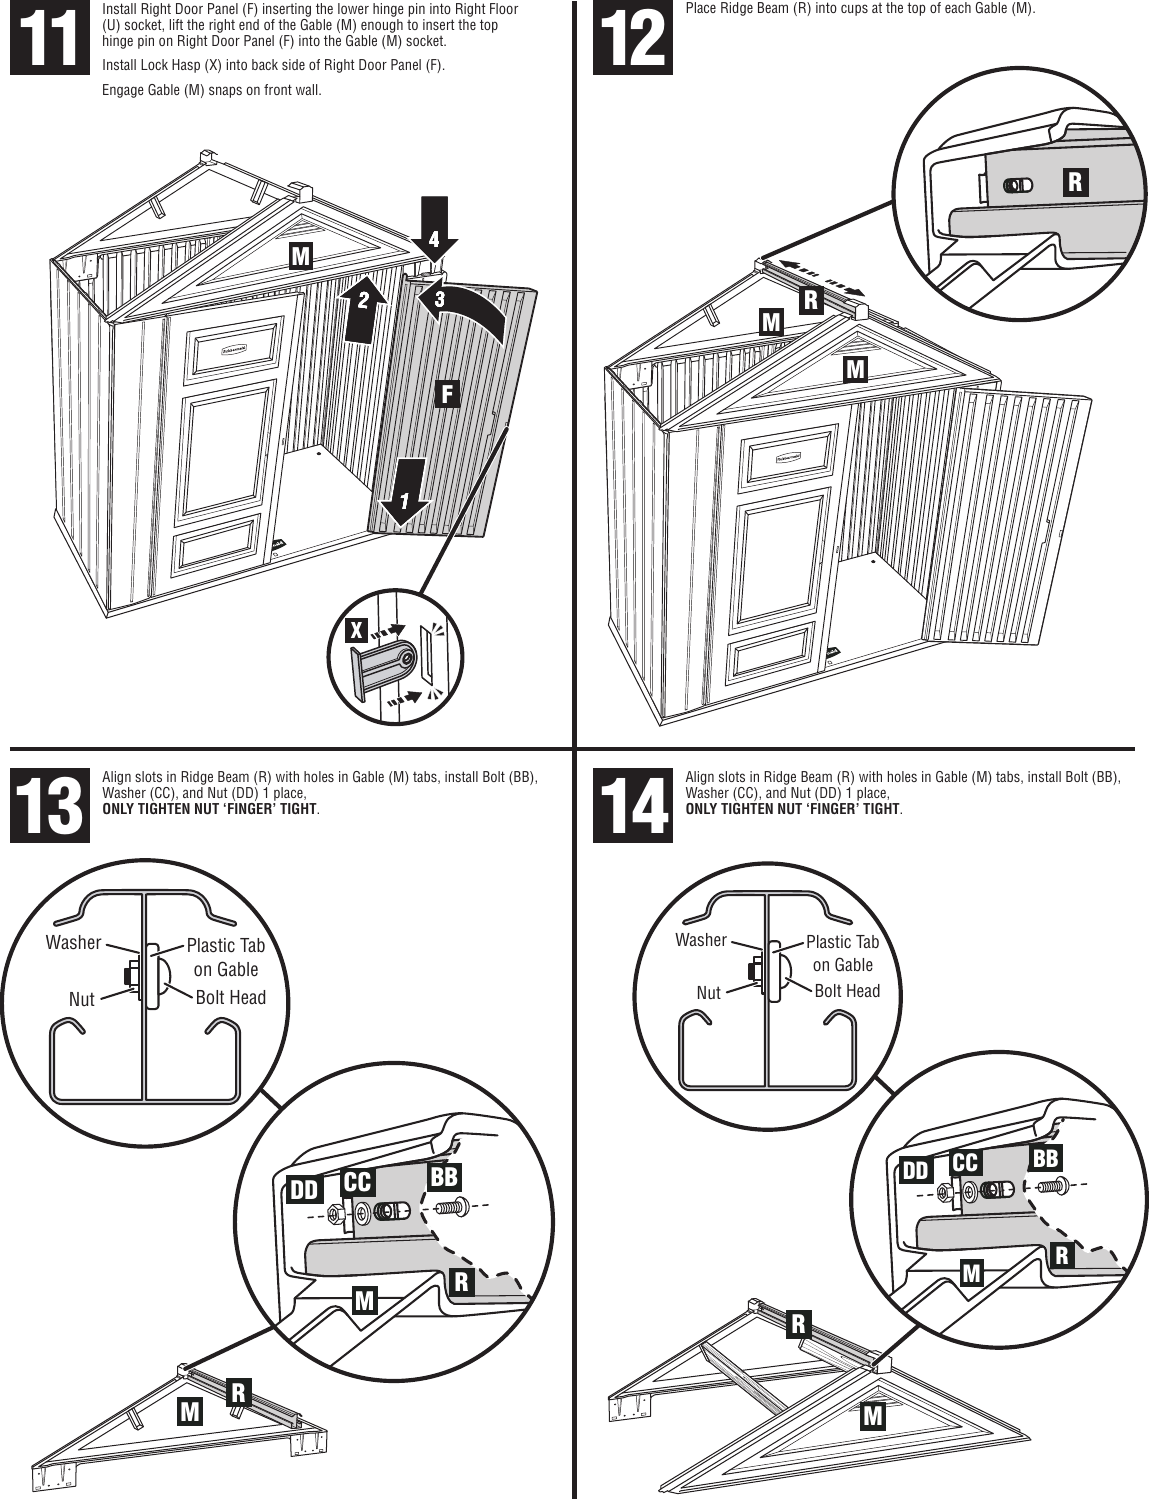 Page 5 of 9 - Rubbermaid Rubbermaid-Outdoor-Storage-1S85-Users-Manual- Big Max Jr Assembly Instruction Manual English  Rubbermaid-outdoor-storage-1s85-users-manual